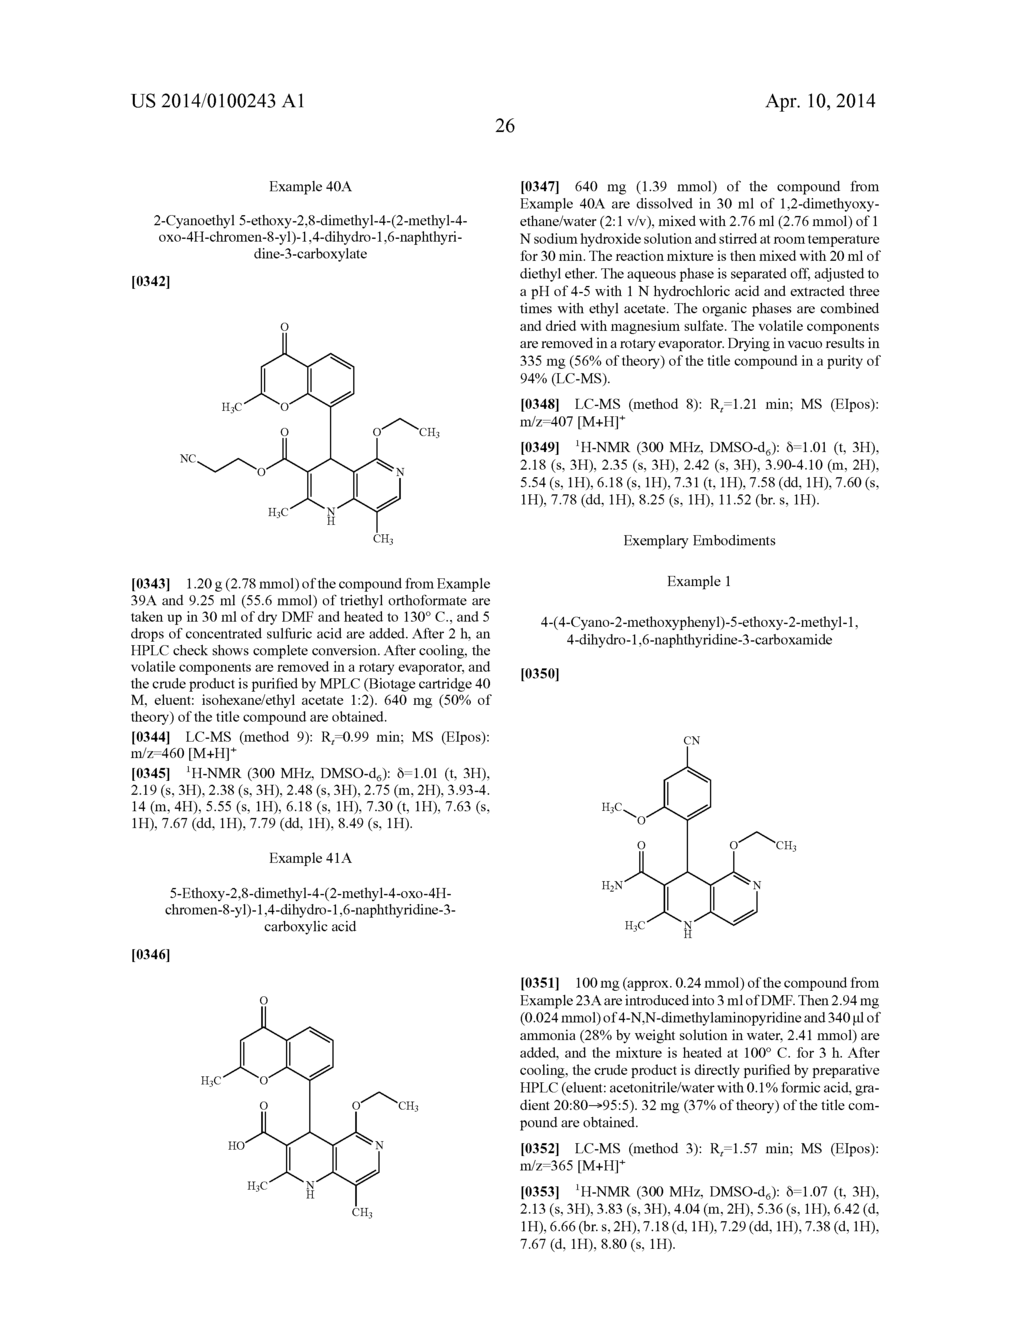 SUBSTITUTED 4-ARYL-1,4-DIHYDRO-1,6-NAPHTHYRIDINE AMIDES AND THEIR USE - diagram, schematic, and image 27